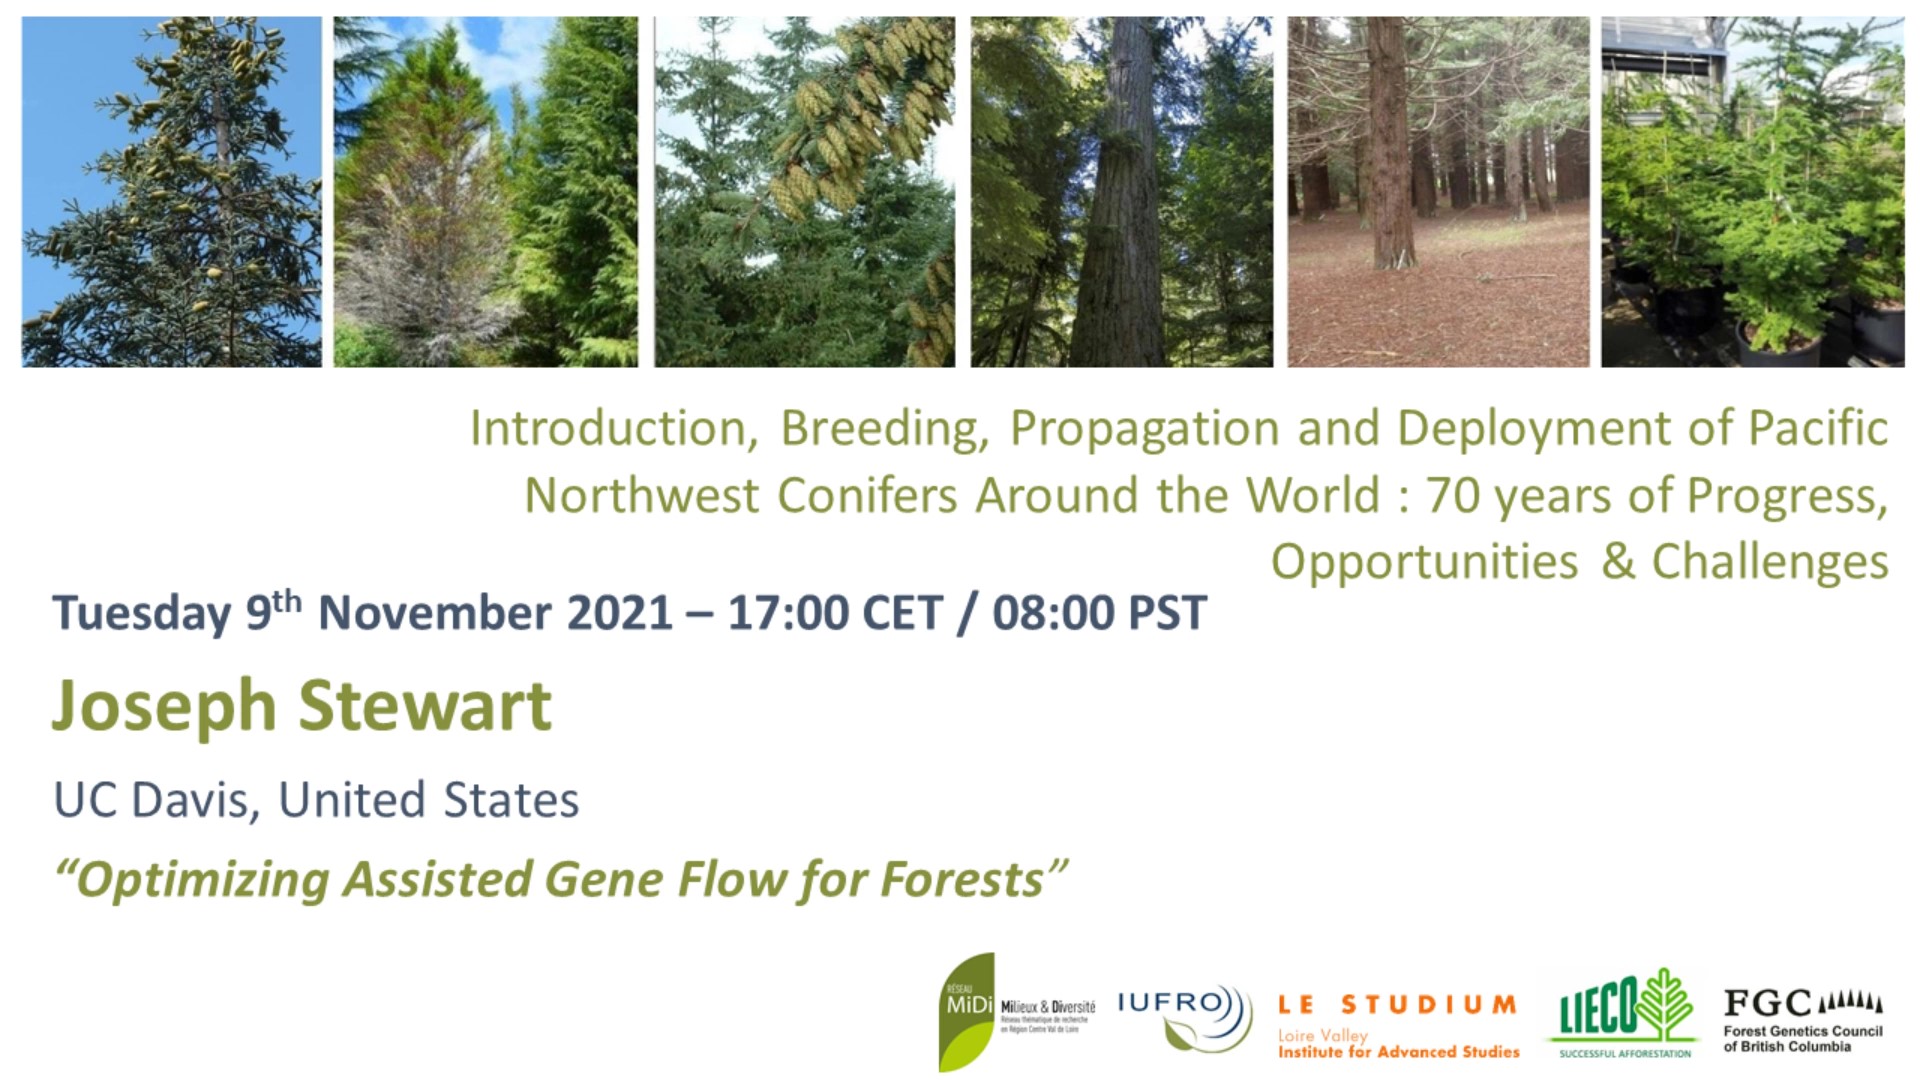 Optimizing Assisted Gene Flow for Forests - Joseph Stewart